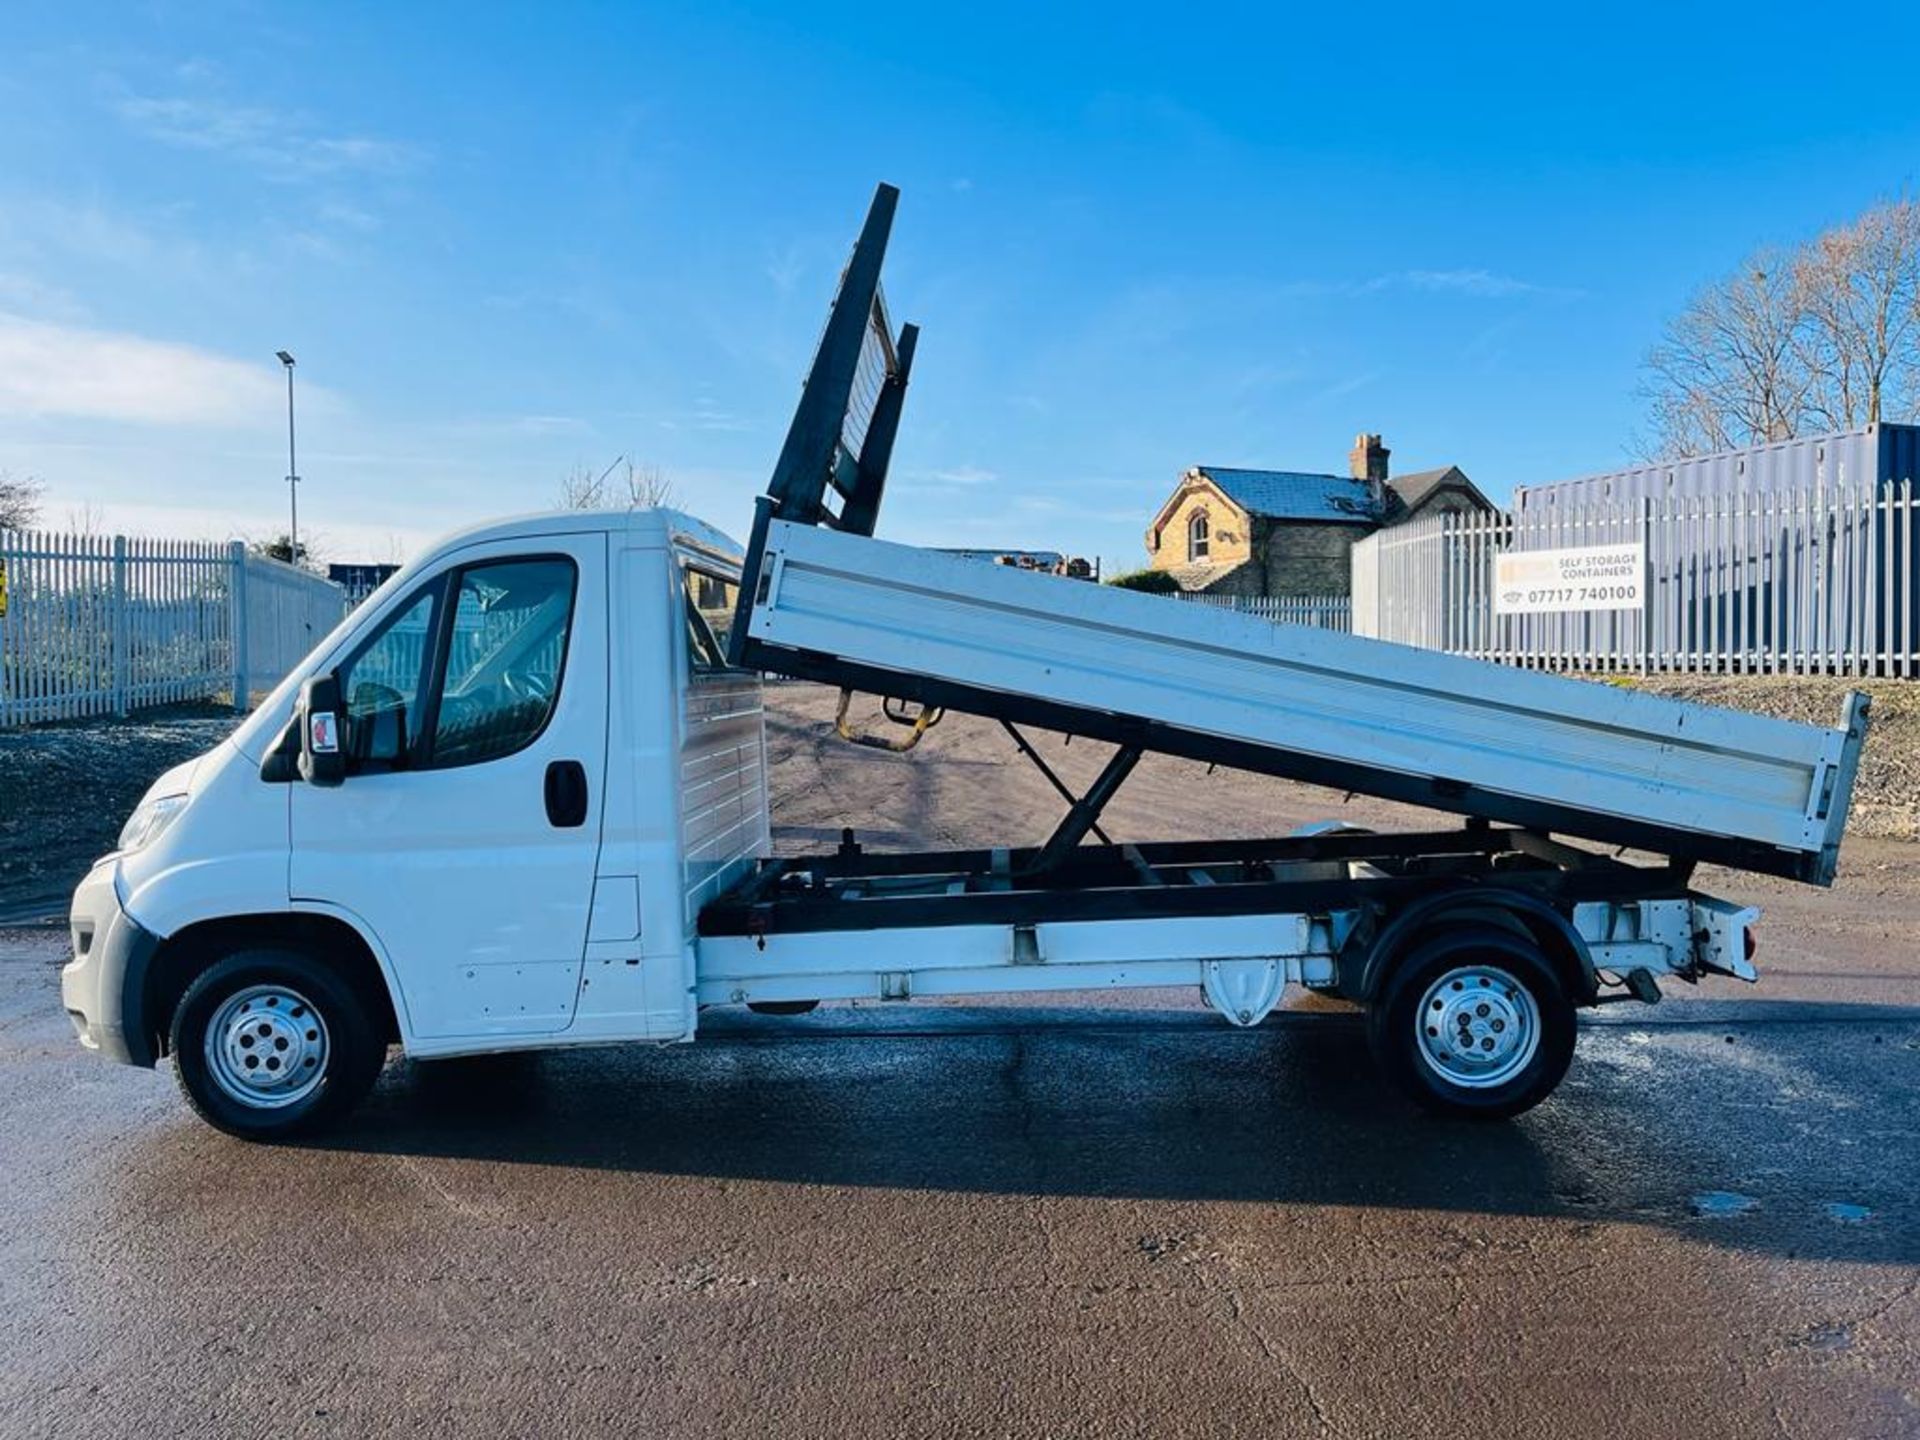 ** ON SALE ** Citroen Relay 35 2.2 HDI 130 LWB Alloy Tipper 2015 '15 Reg' Only 105,090 Miles - Image 6 of 31